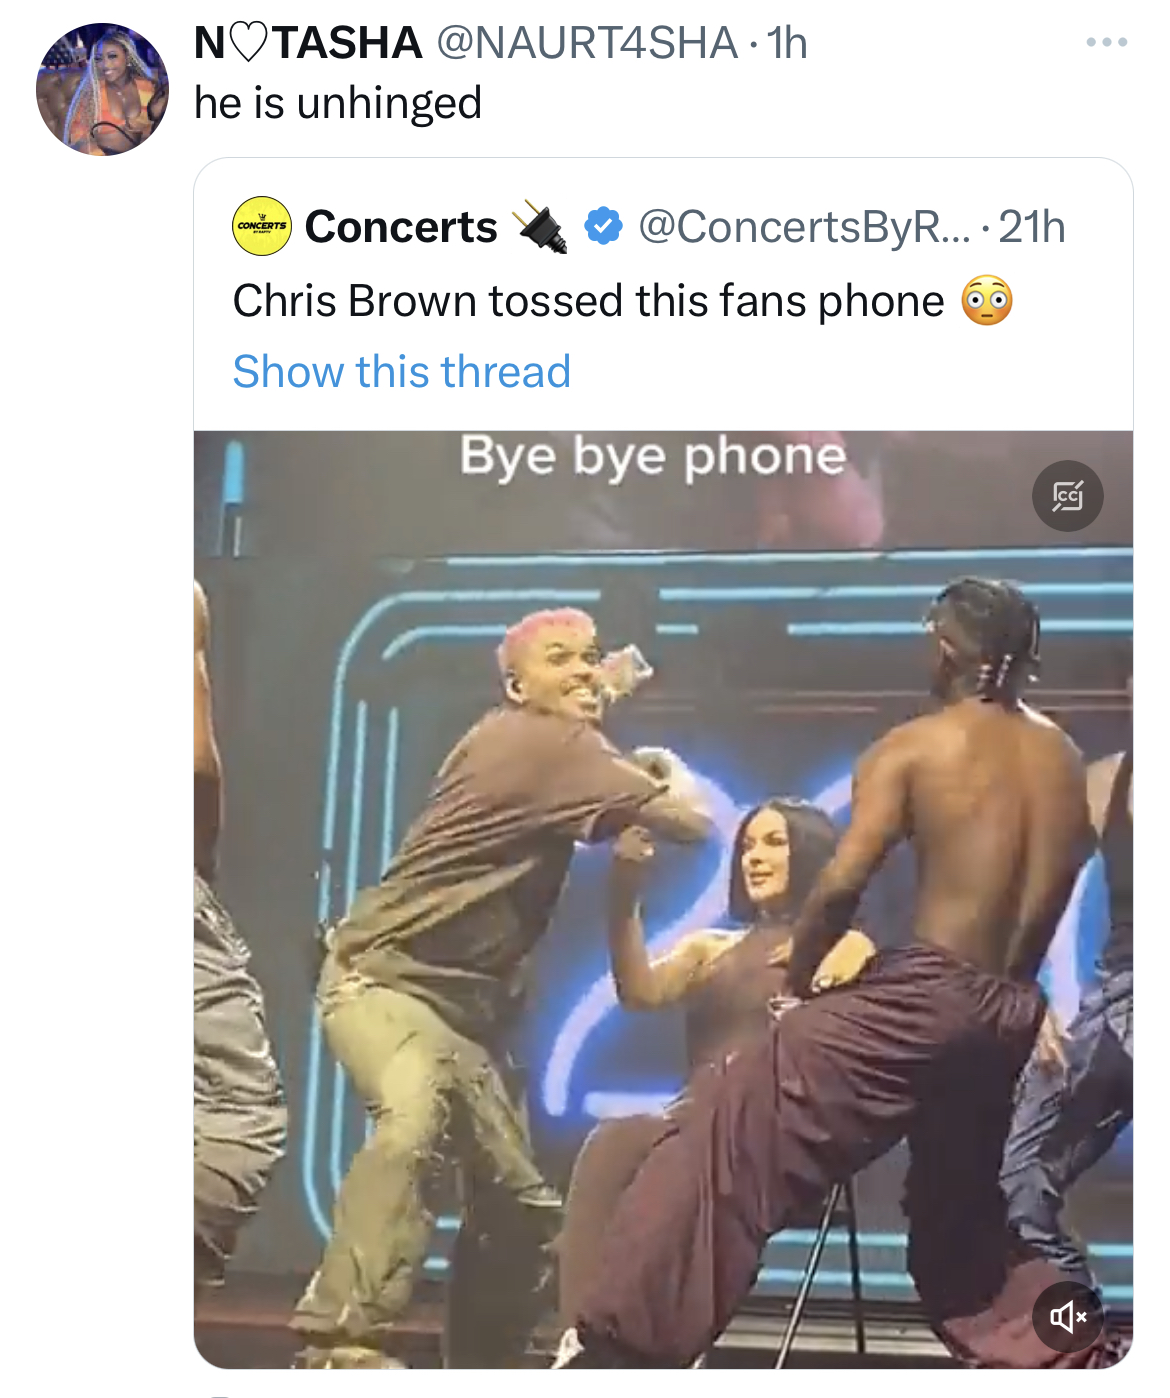 tweets roasting celebs - muscle - Notasha . 1h he is unhinged Concerts Chris Brown tossed this fans phone Show this thread .... 21h Bye bye phone Lel www